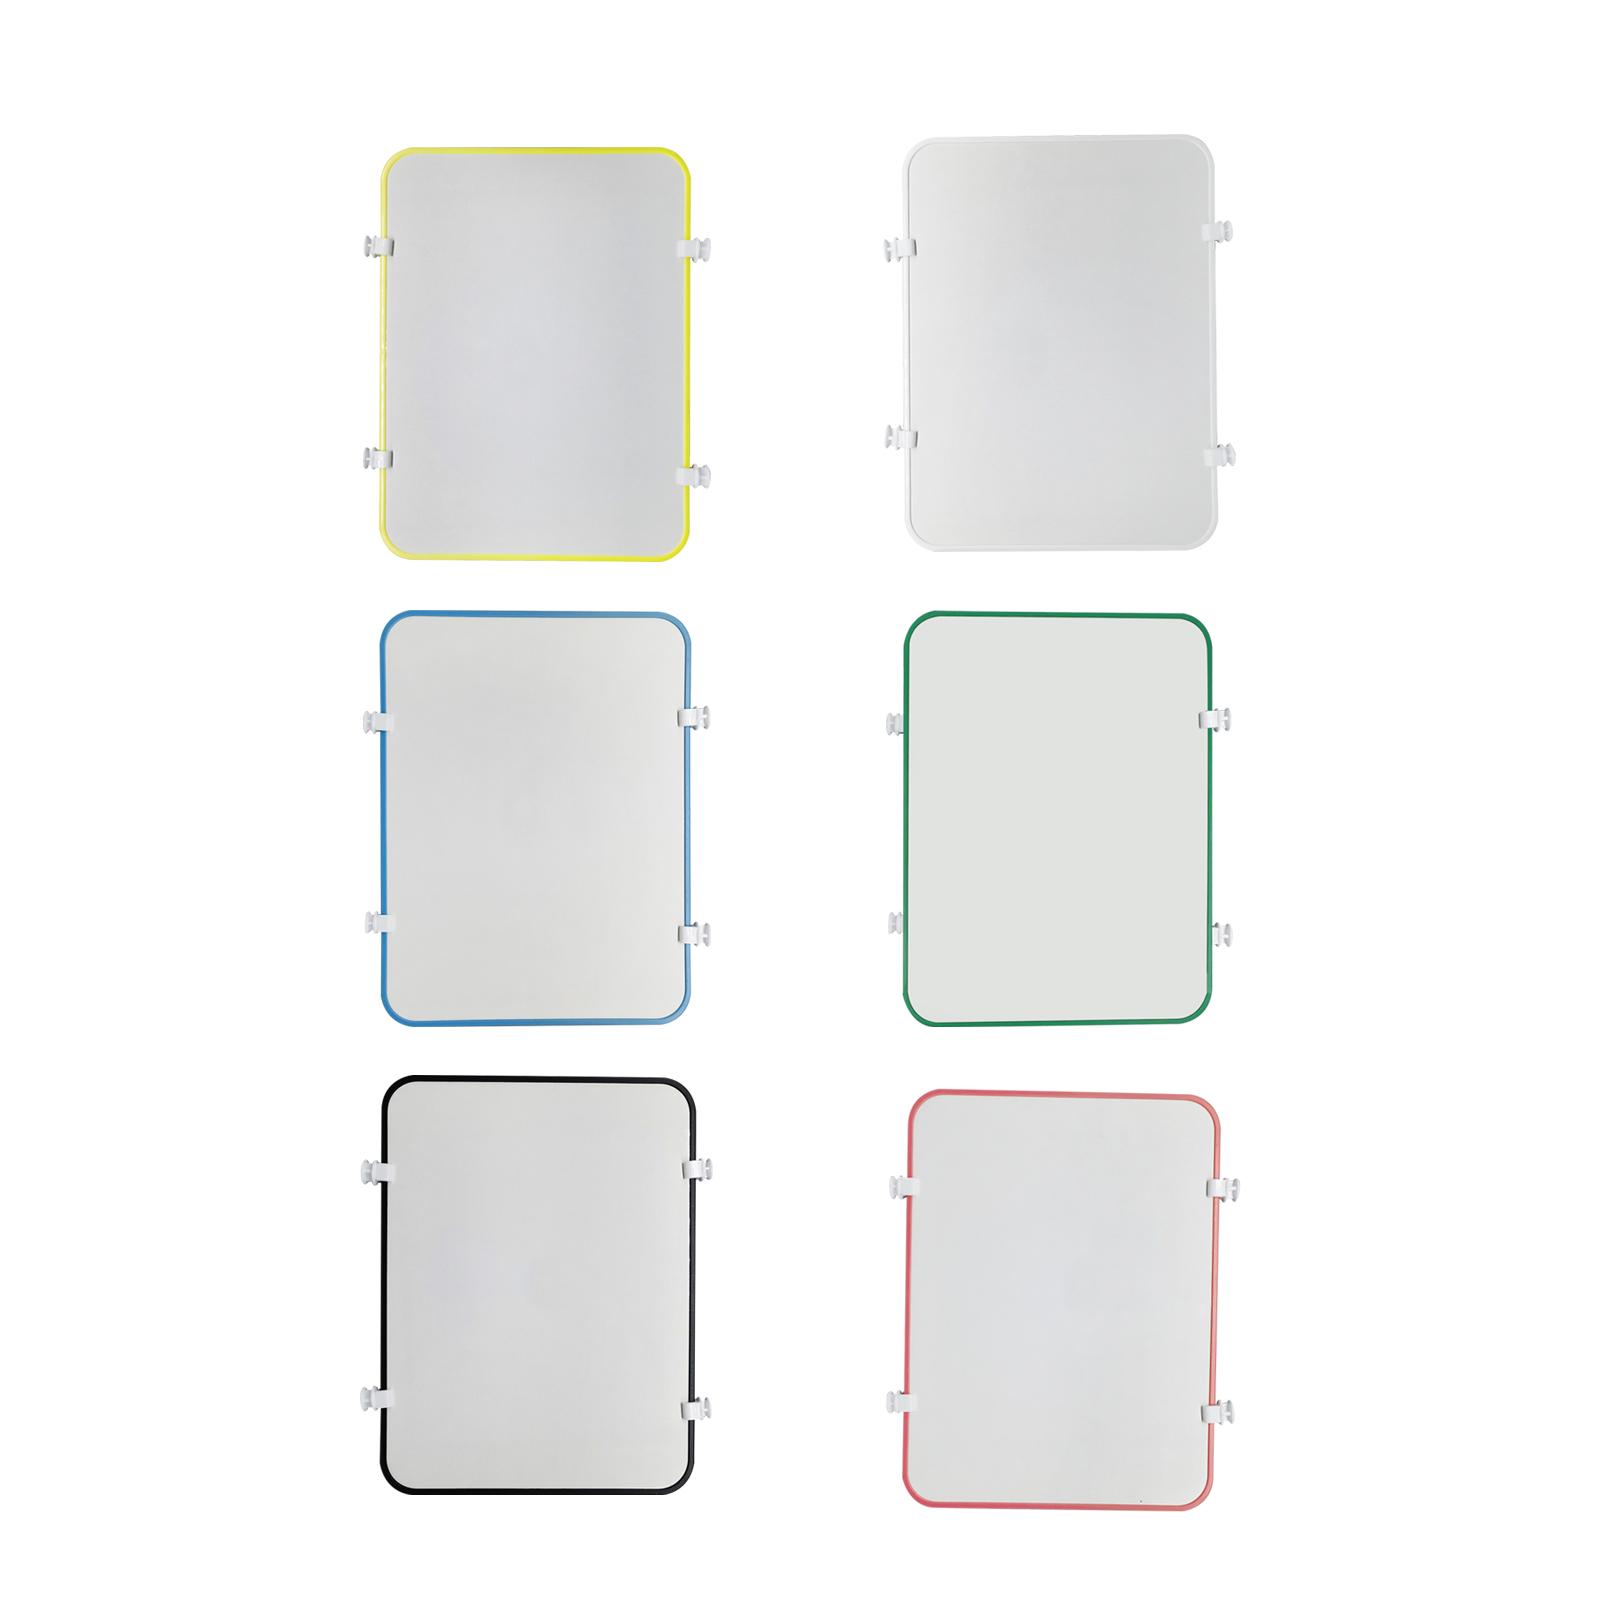 Organizer Bag Tray Insert Dividers Durable Portable Adjustable Bag Divider Tray for Home Kitchen Drawer Cupboard Shelf